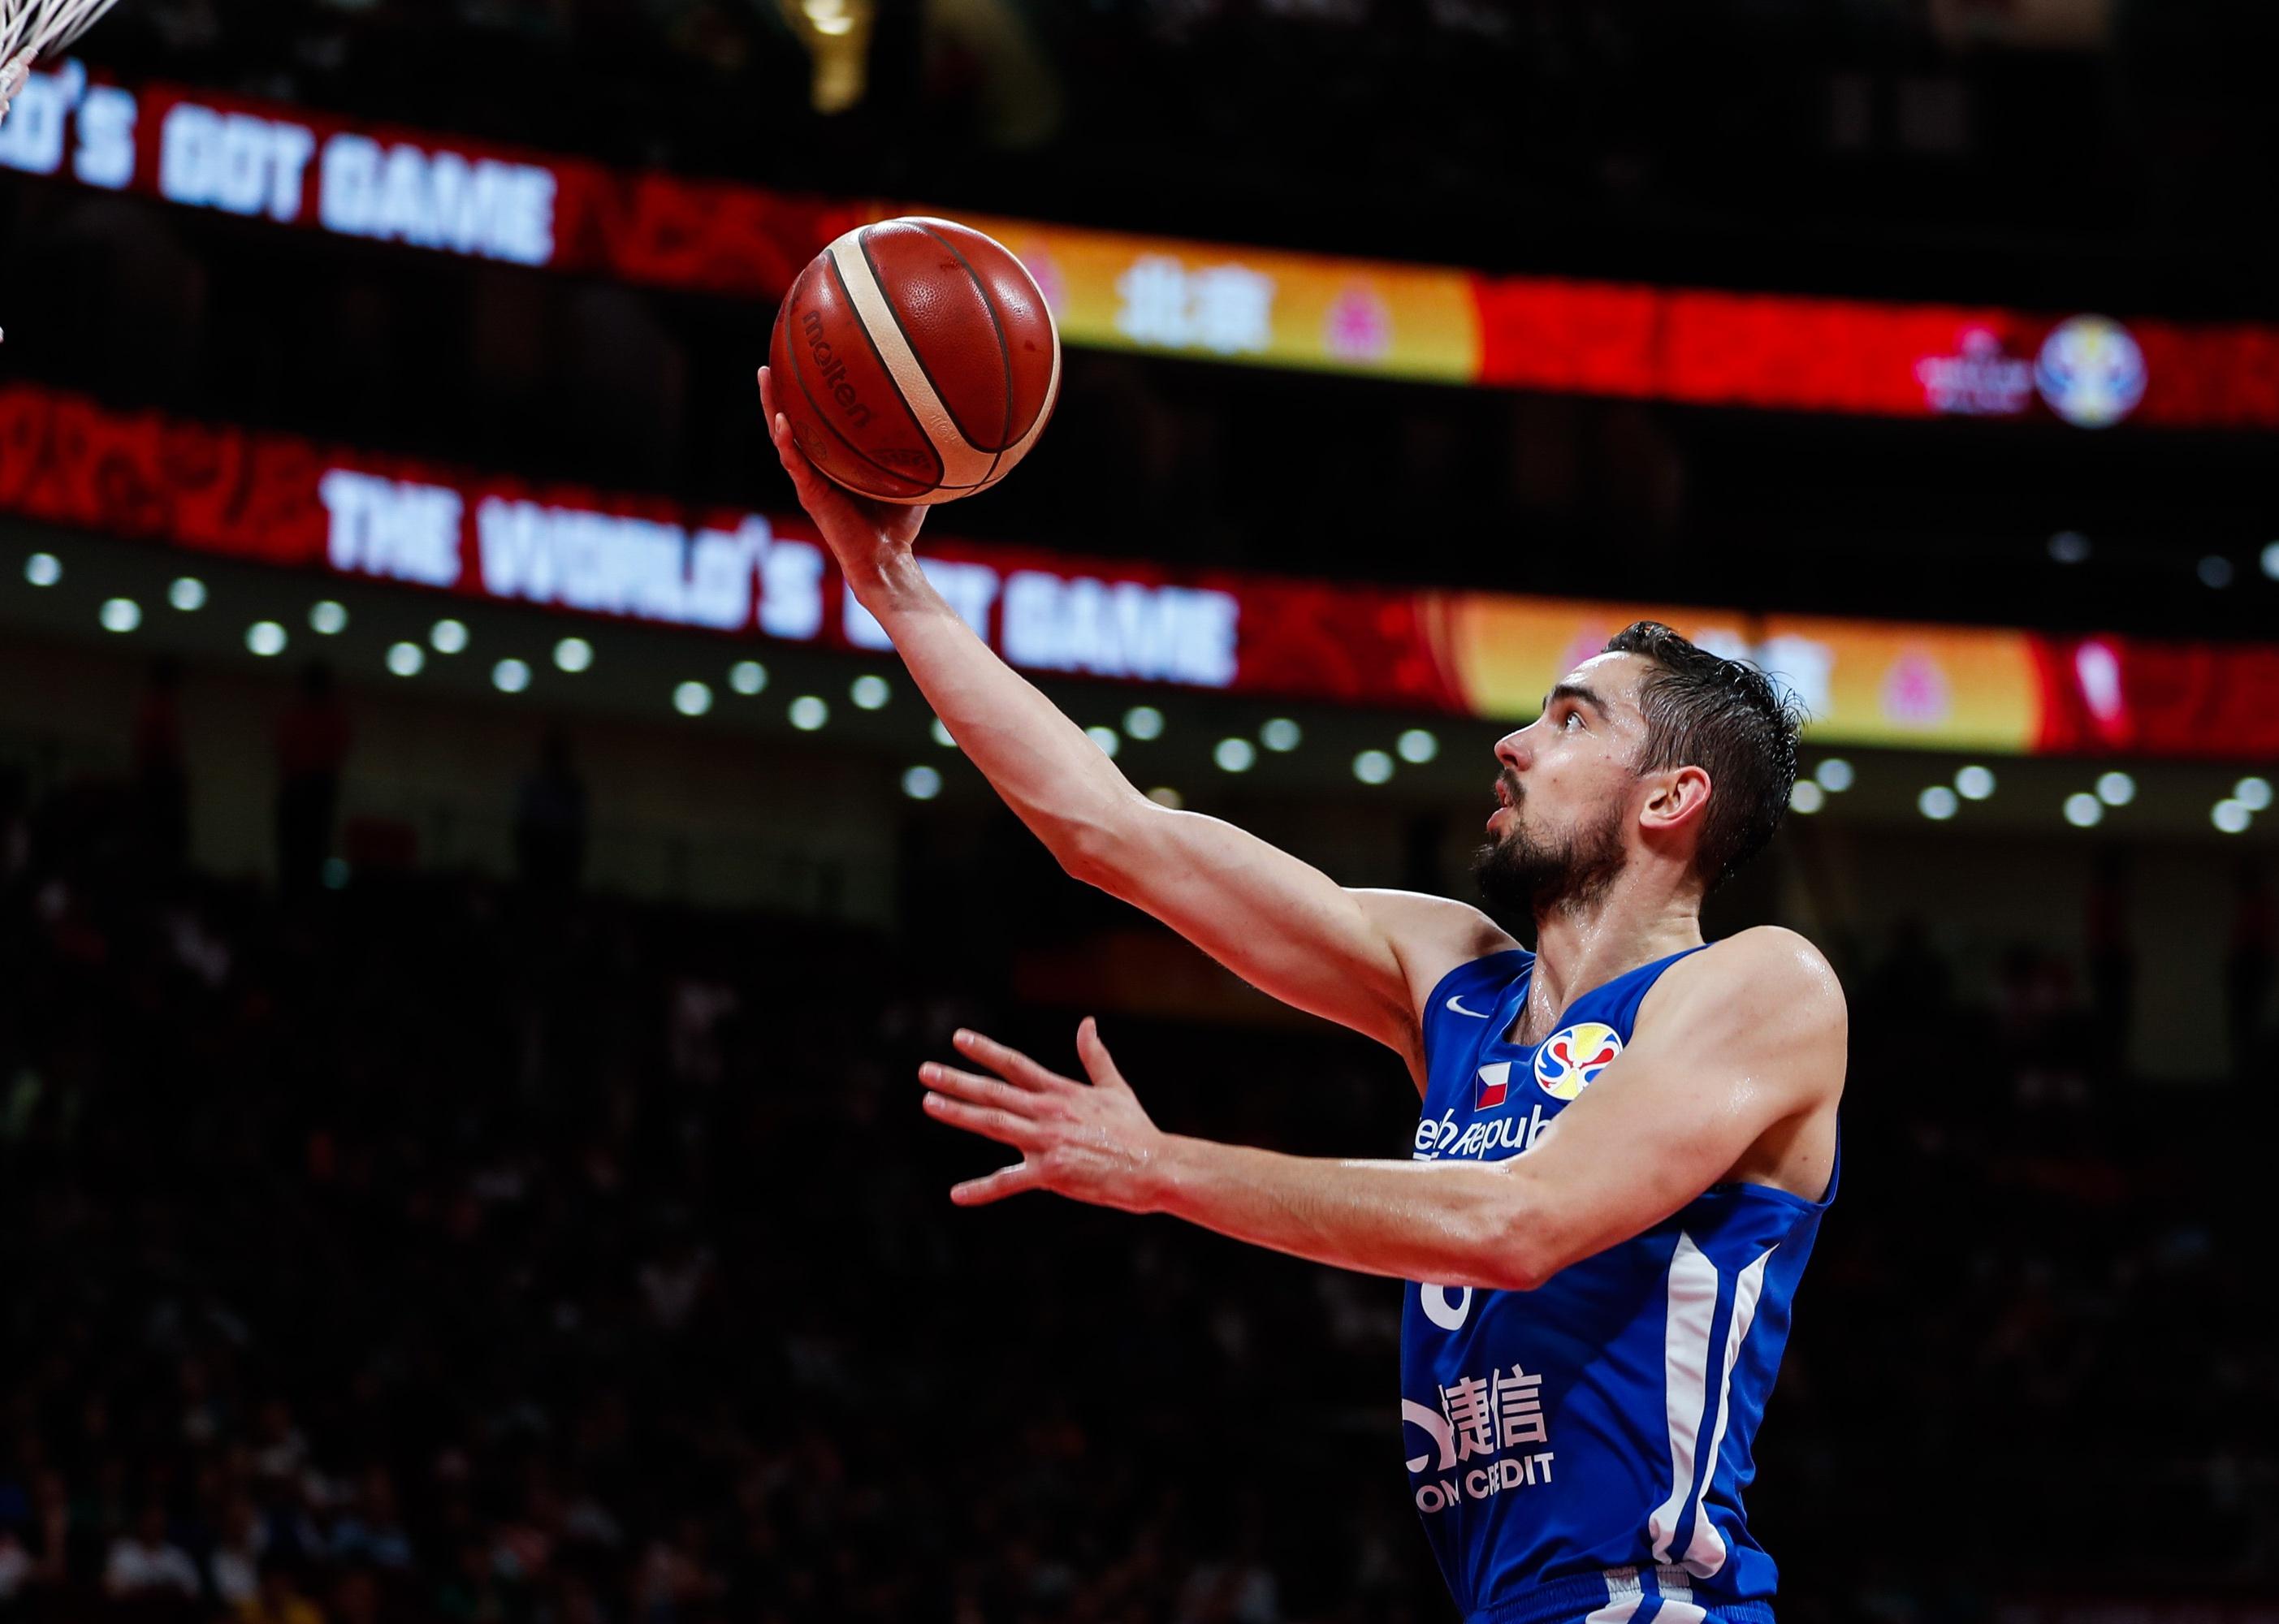 Tomas Satoransky of Czech Republic goes to the basket during FIBA World Cup 2019 Games.